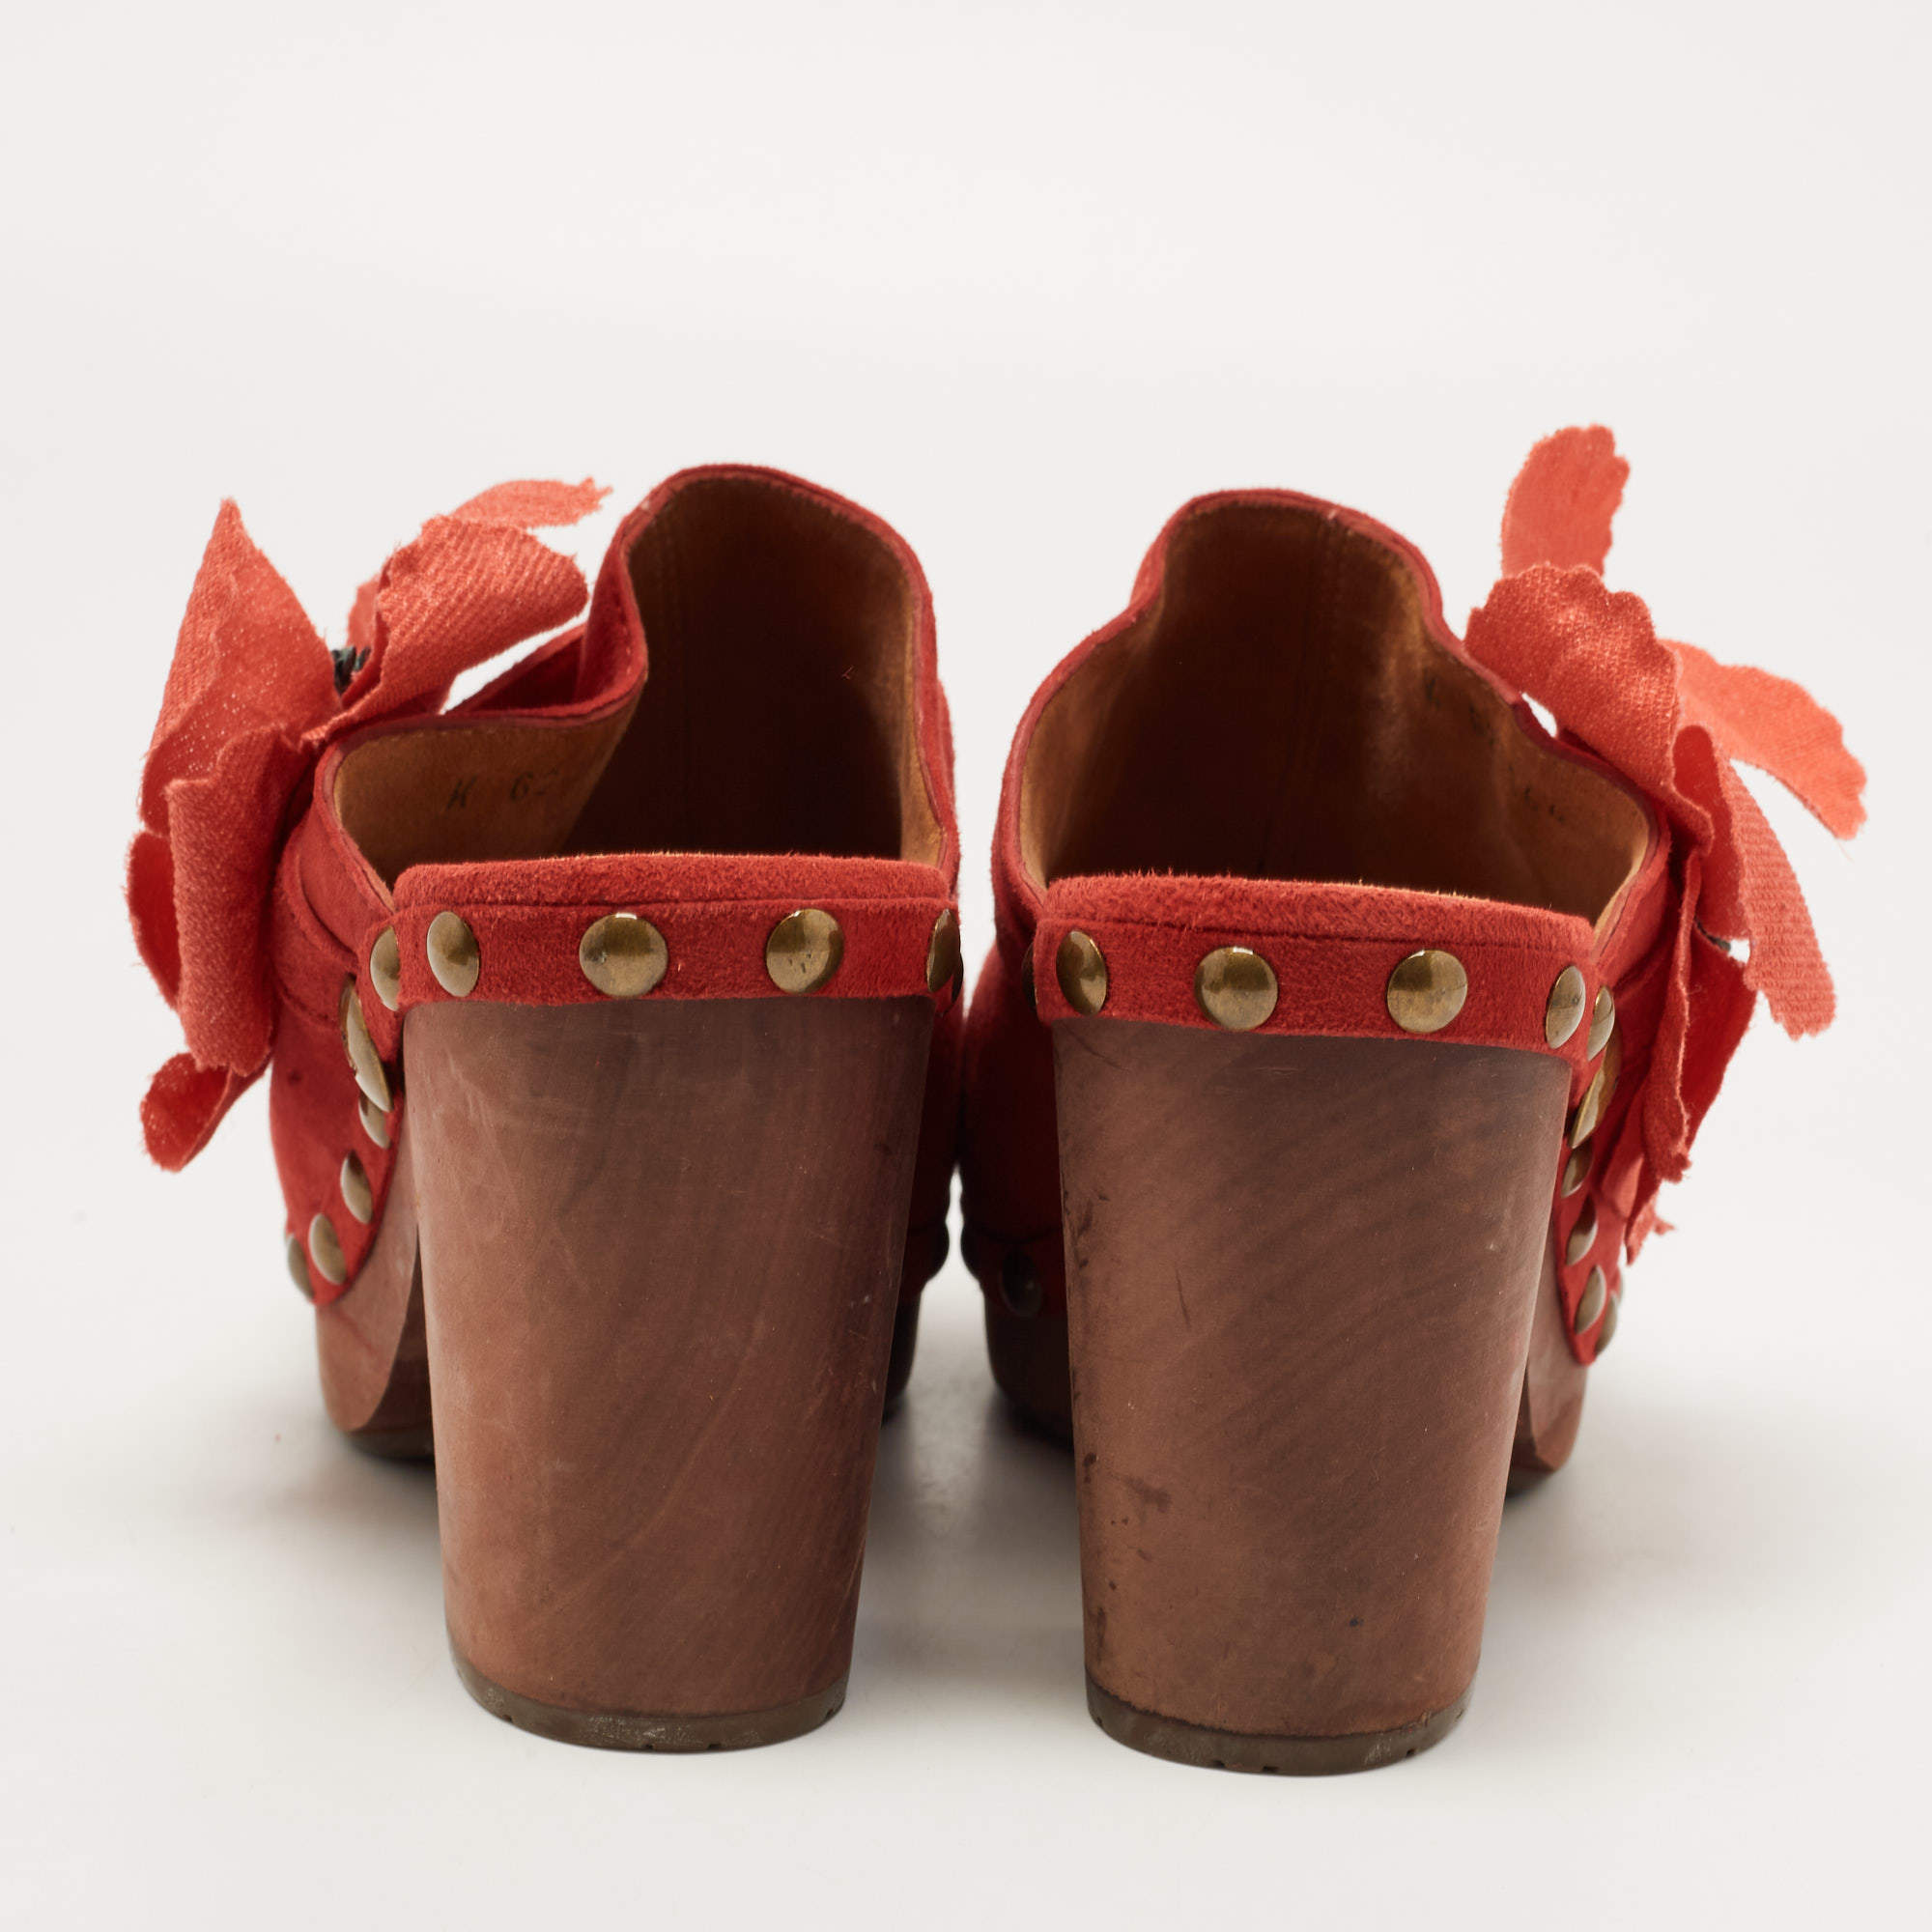 Chanel Red Suede Camelia Applique Wooden Clogs Size 37 Chanel